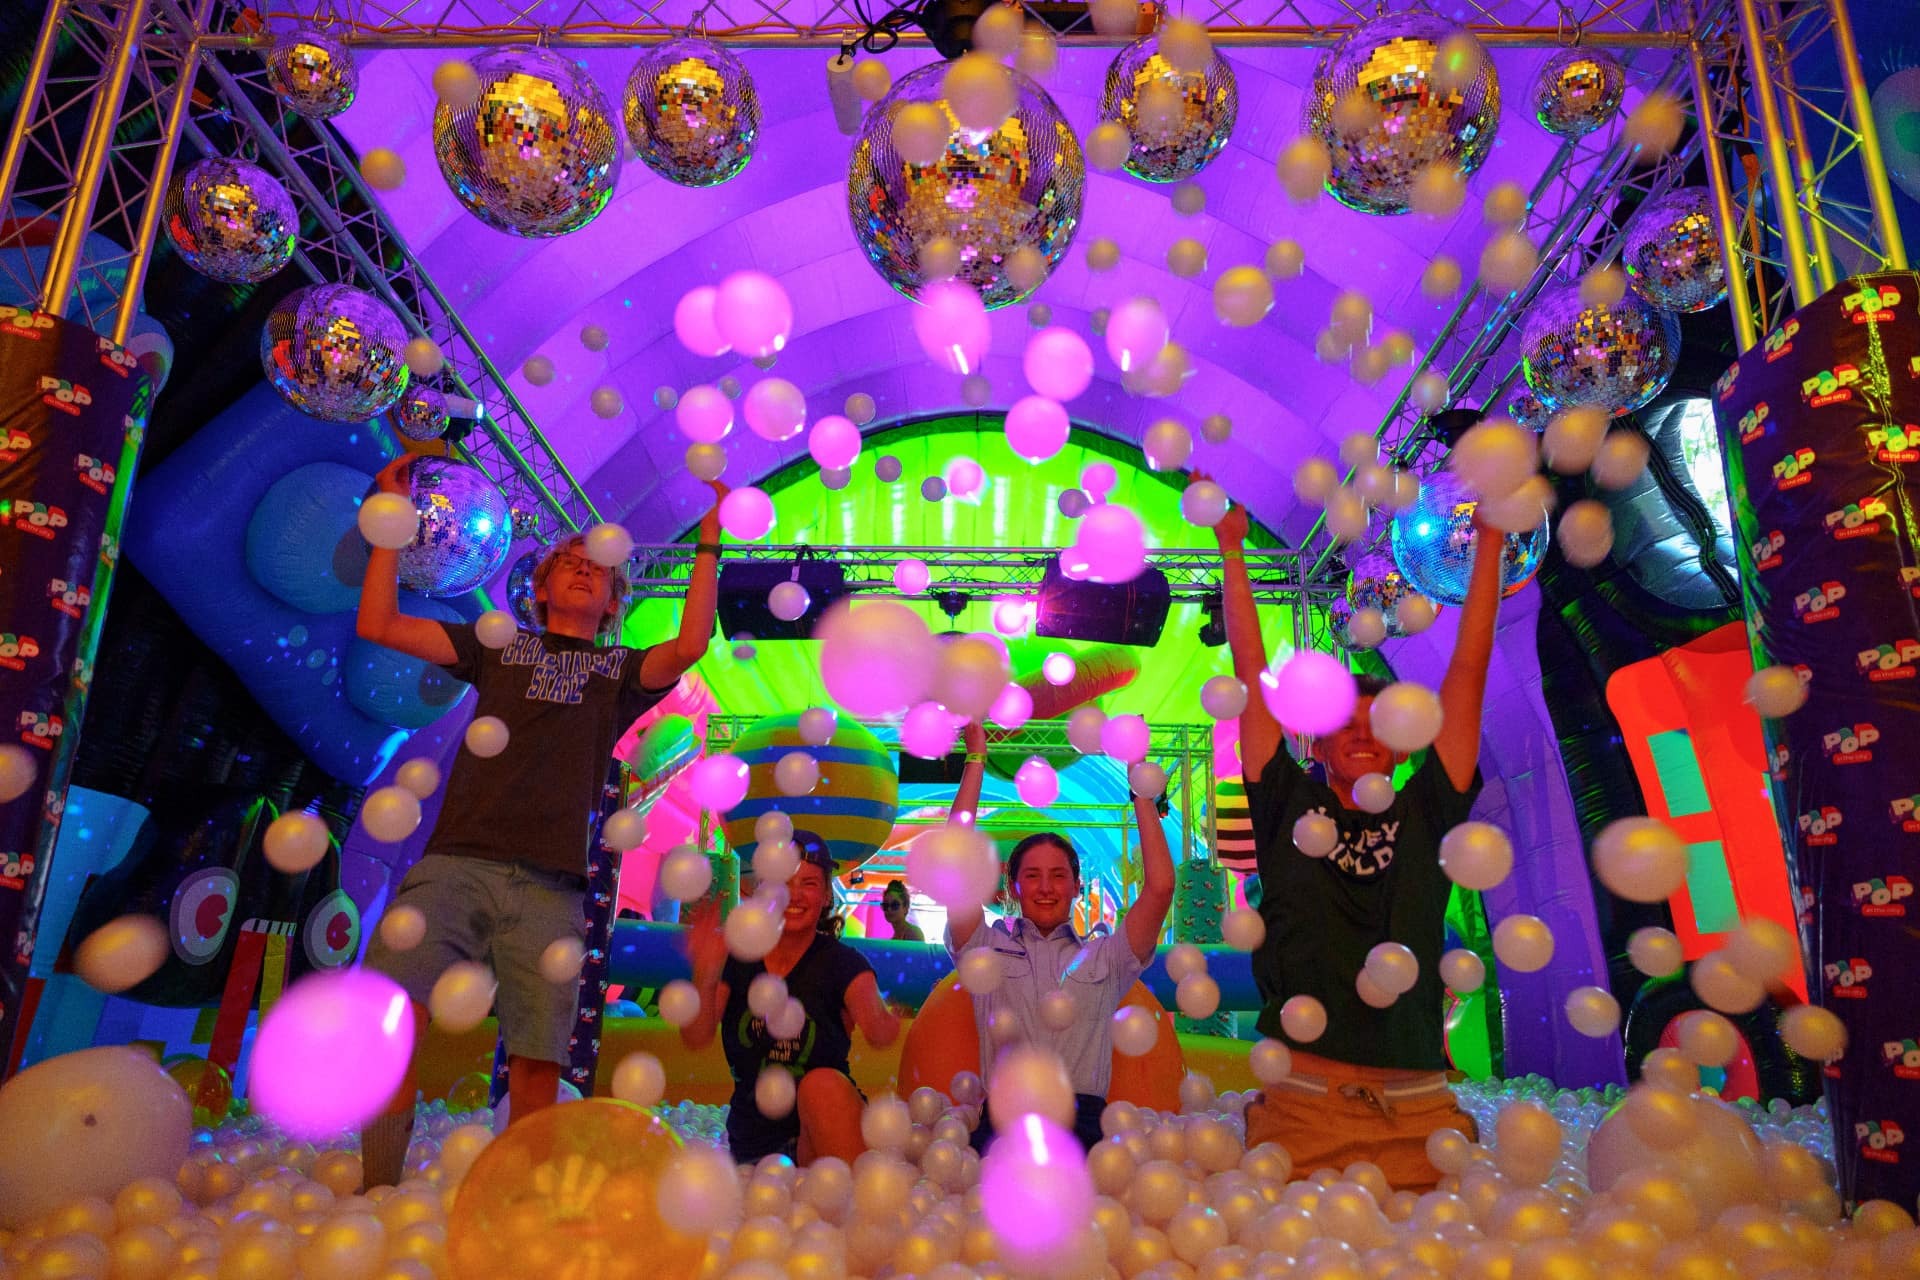 A giant inflatable wonderland is returning to NYC for a limited time